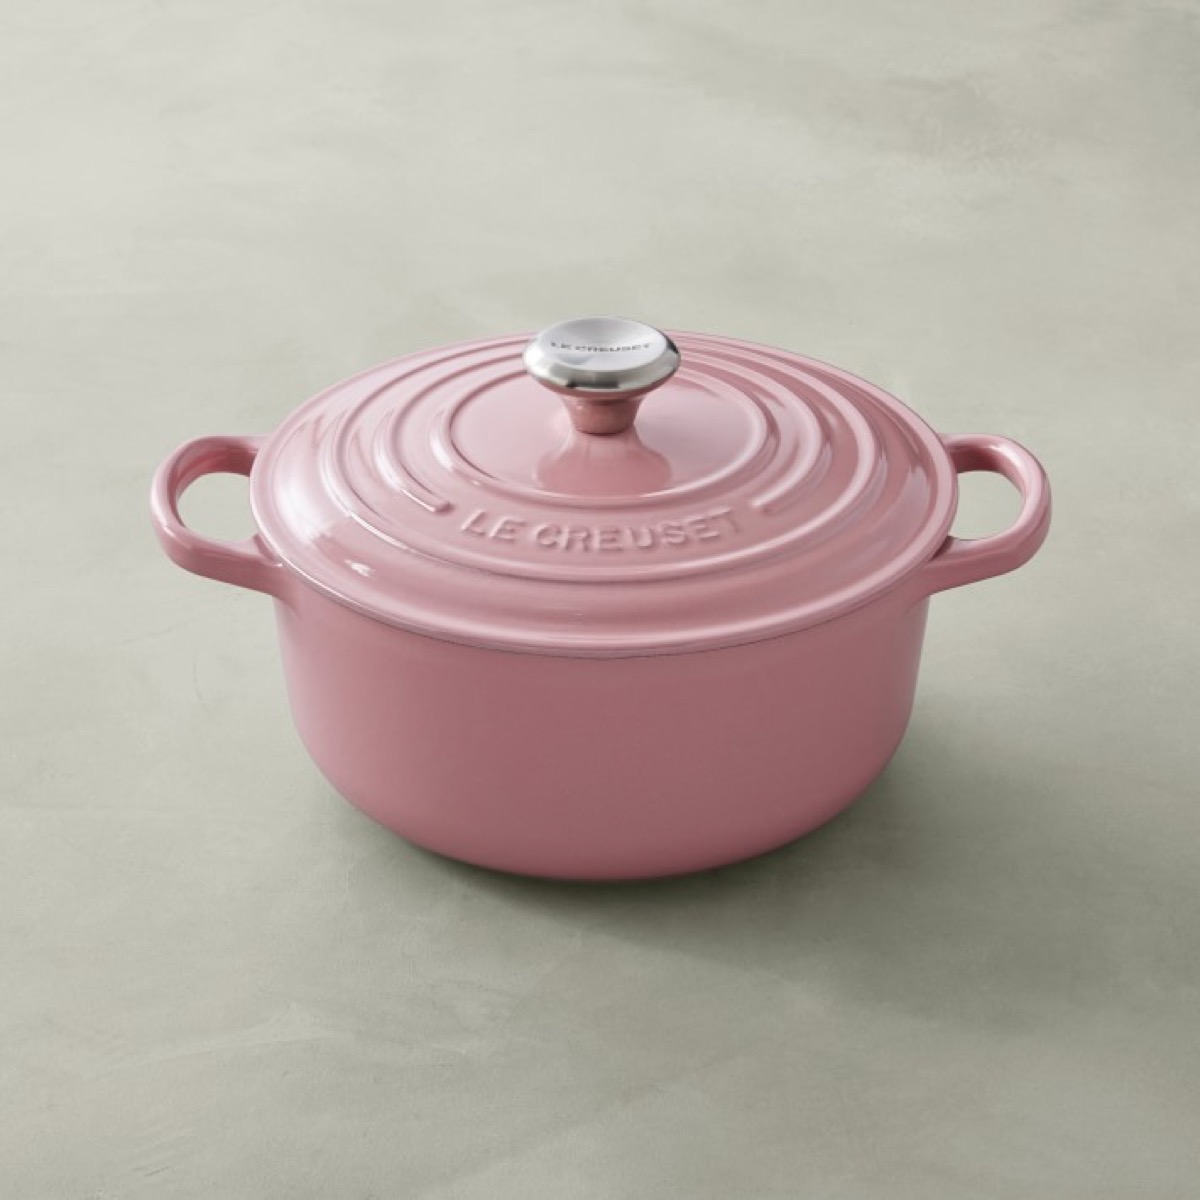 Le Creuset Dutch Oven Mother's Day Gifts